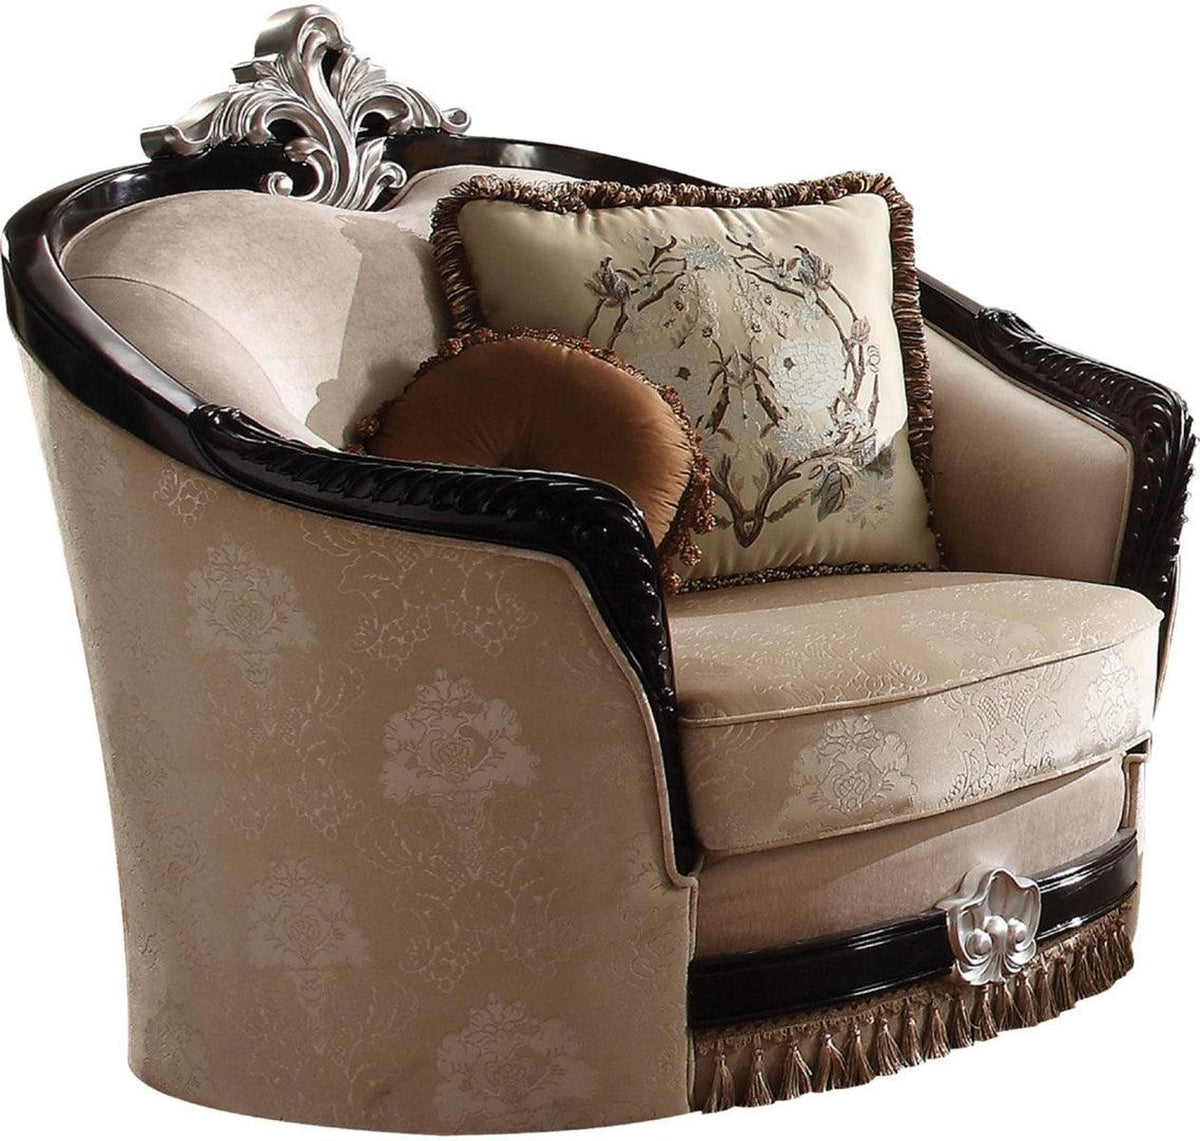 Acme Furniture Ernestine Chair with 2 Pillows in Tan and Black 52112  Half Price Furniture